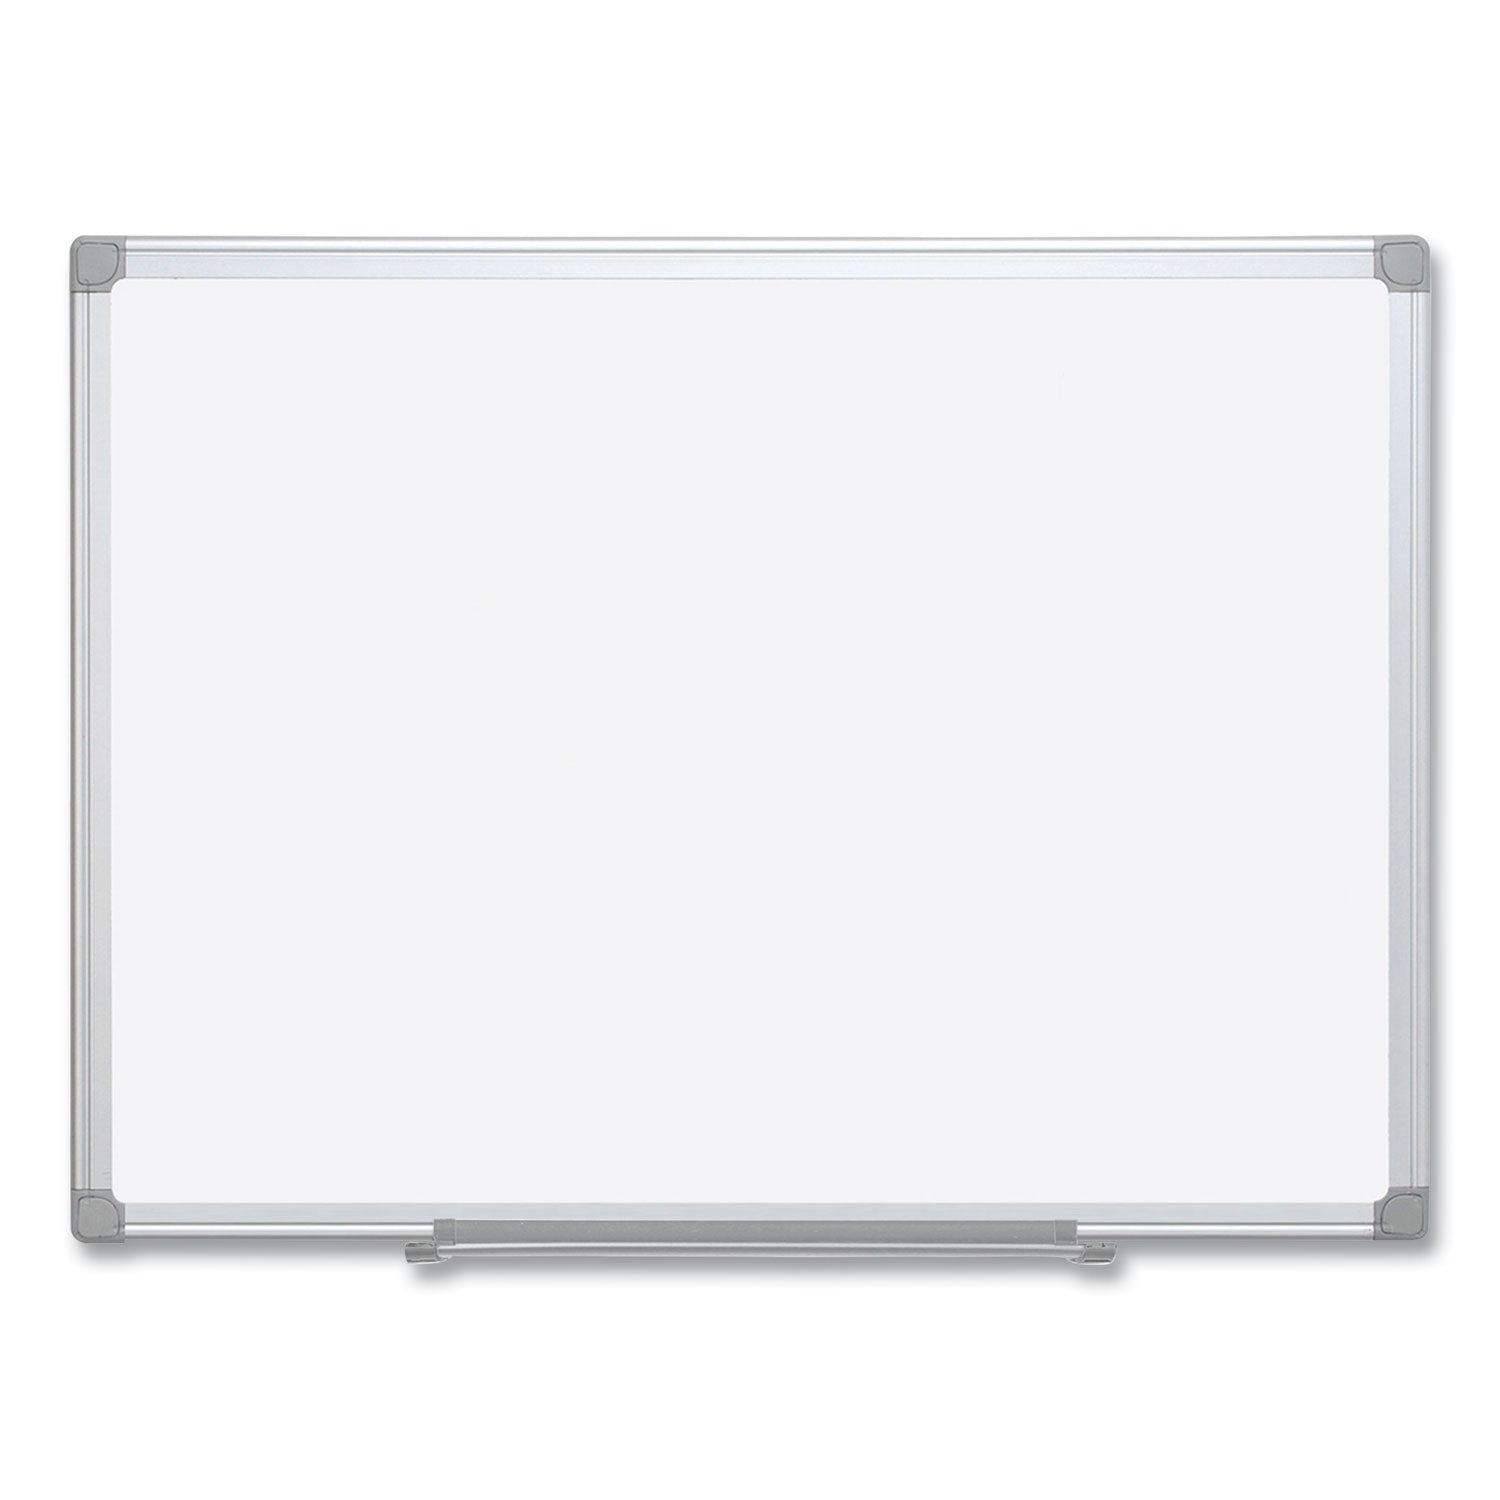 Earth Silver Easy-Clean Dry Erase Board, Reversible, 72 x 48, White Surface, Silver Aluminum Frame - 